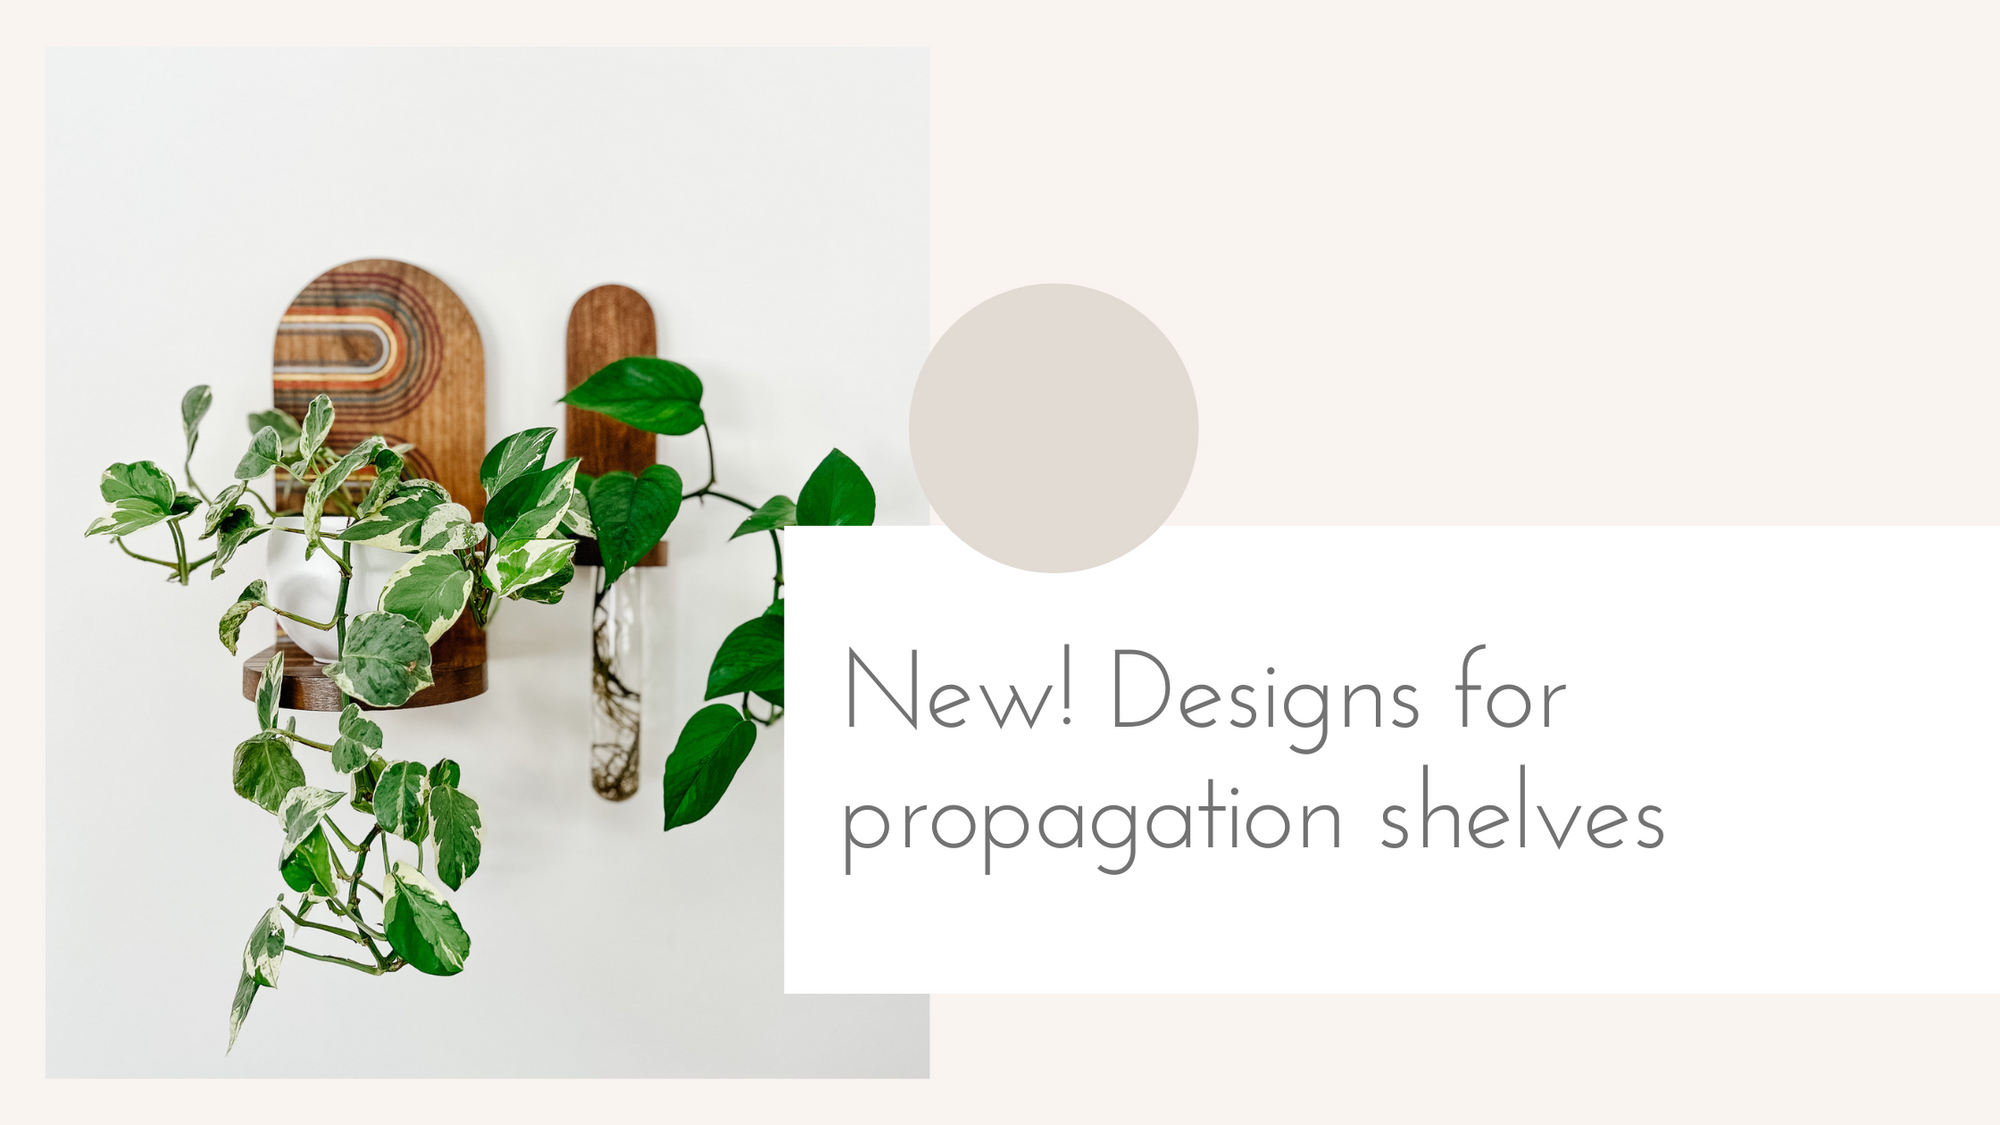 New designs for propagation shelves